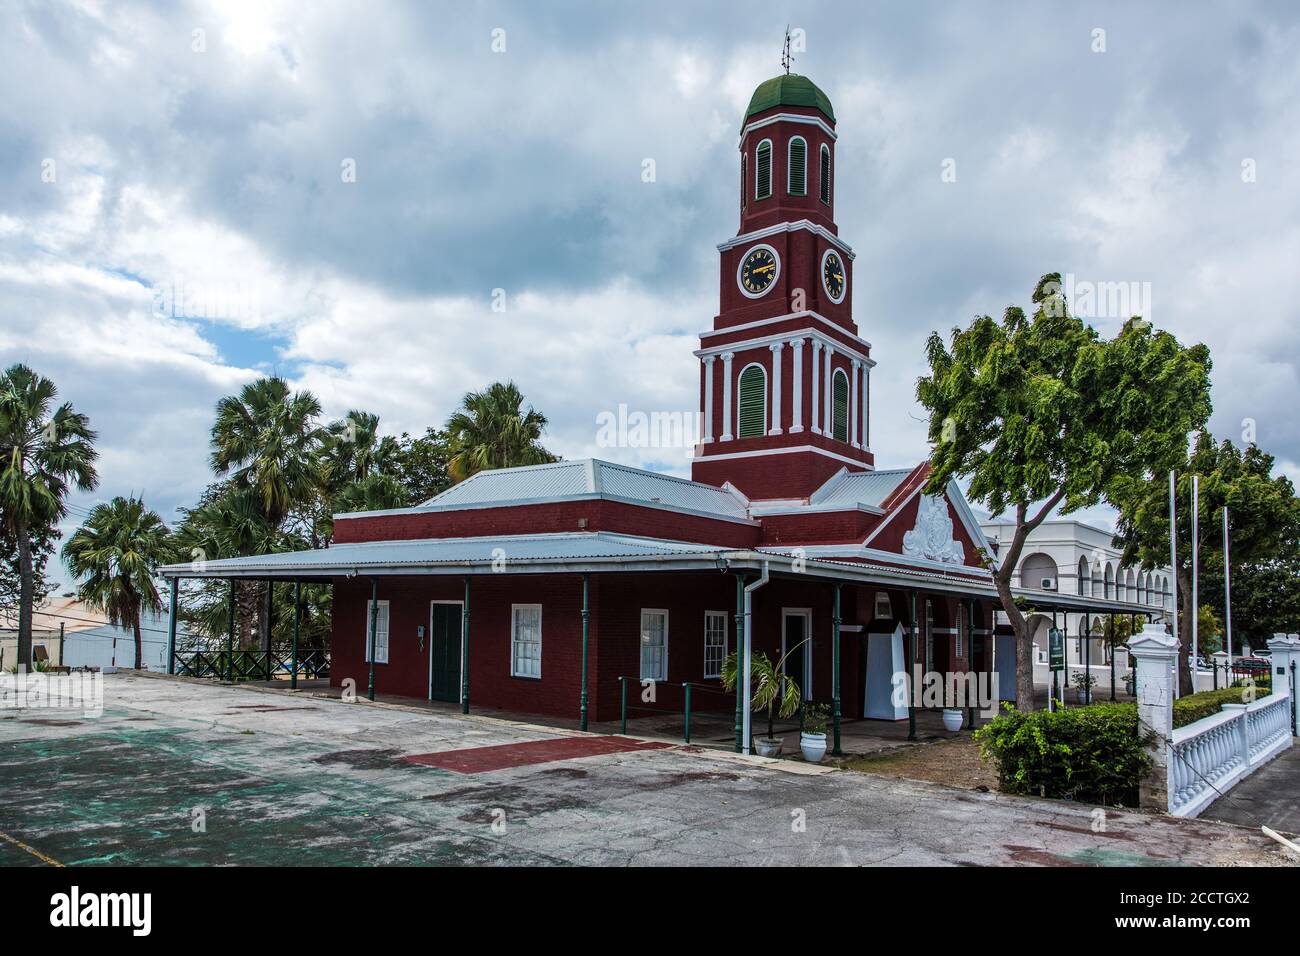 The Main Guard, Barbados Garrison, with it's red clock tower, is now headquarters of the Barbados Legion.  Bridgetown, Barbados.  UNESCO World Heritag Stock Photo